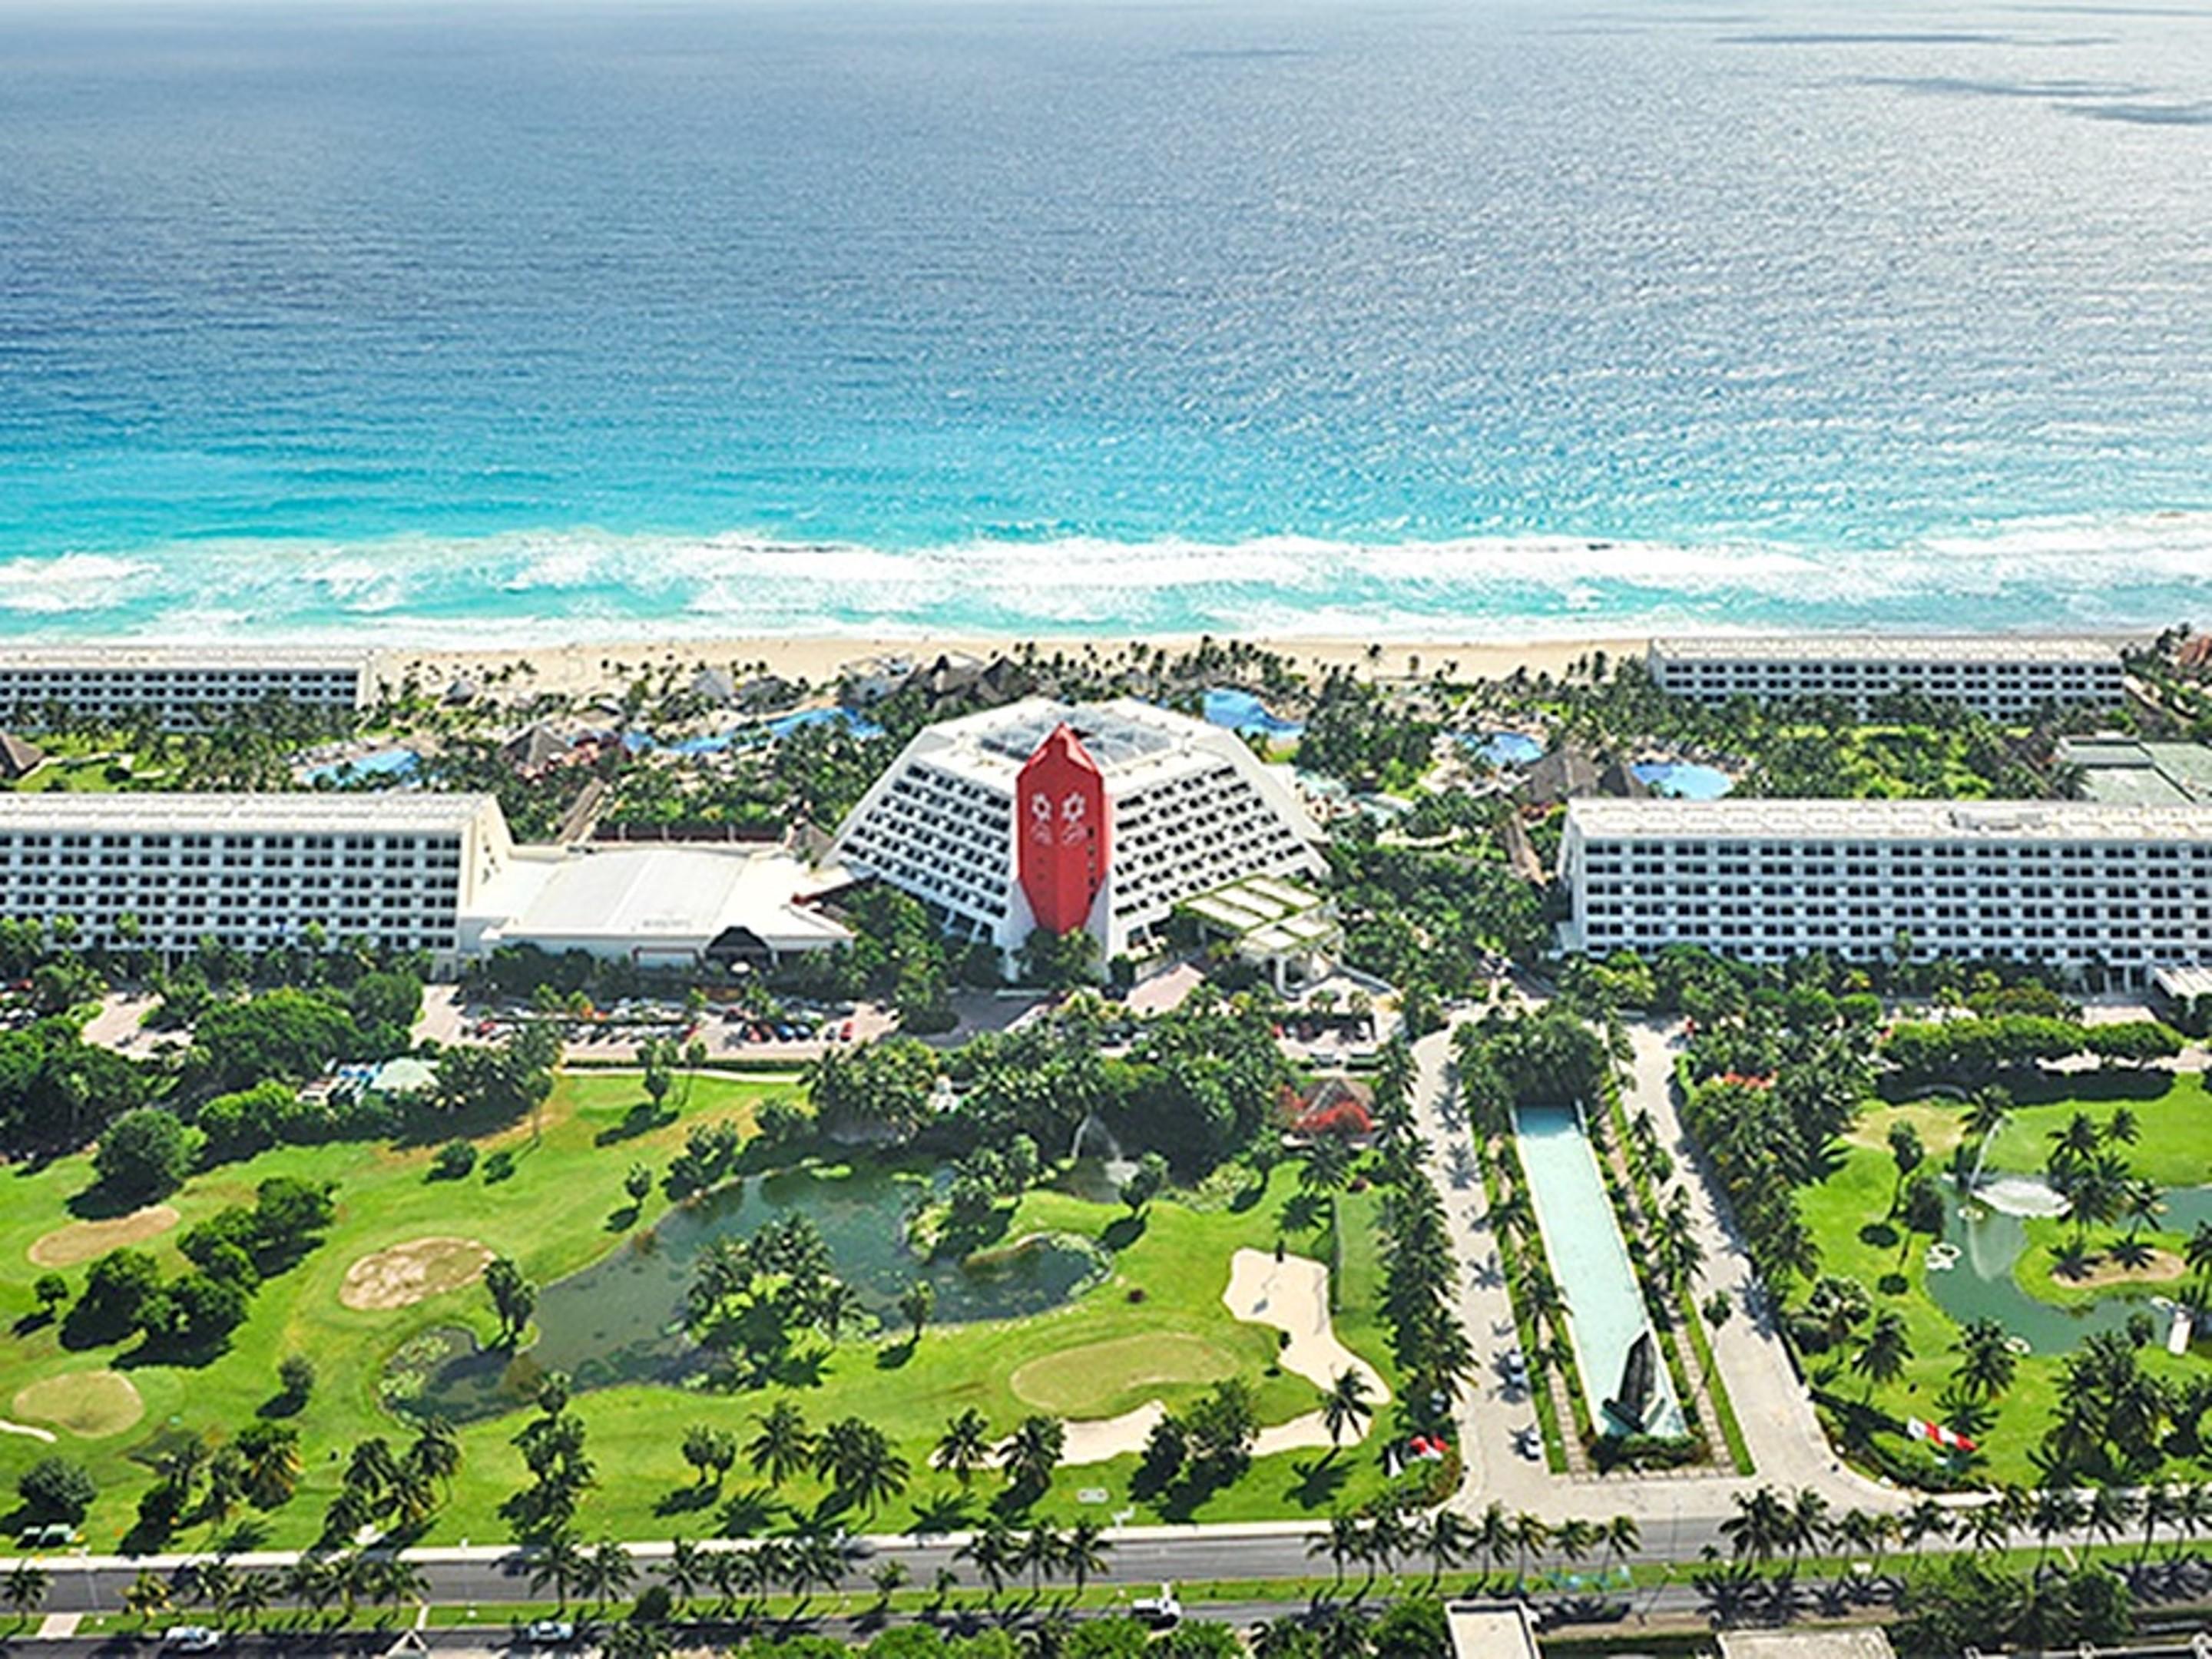 Oh! Cancun - The Urban Oasis & Beach Club (Adults Only) Exteriér fotografie